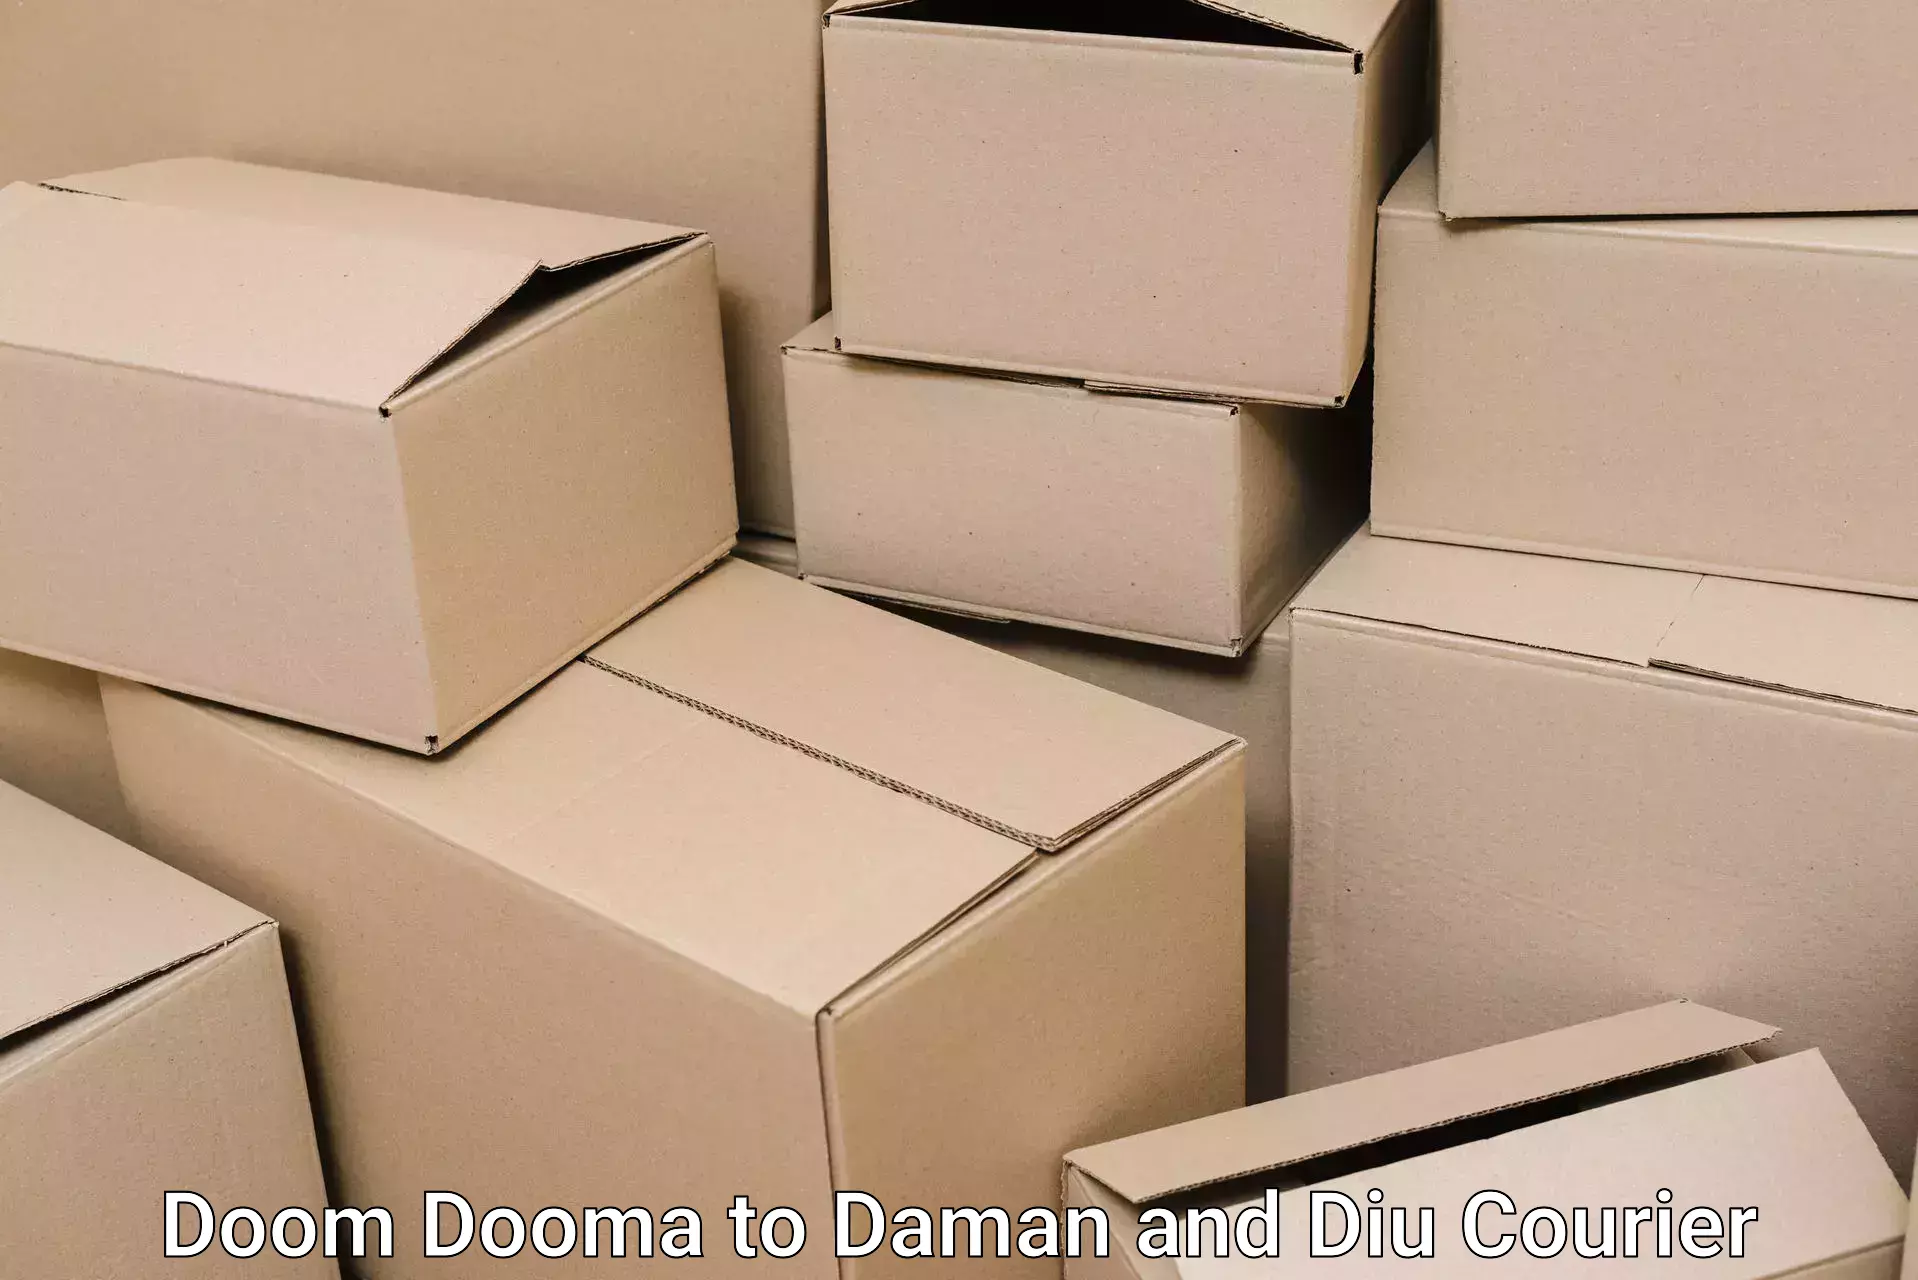 Efficient packing and moving Doom Dooma to Daman and Diu